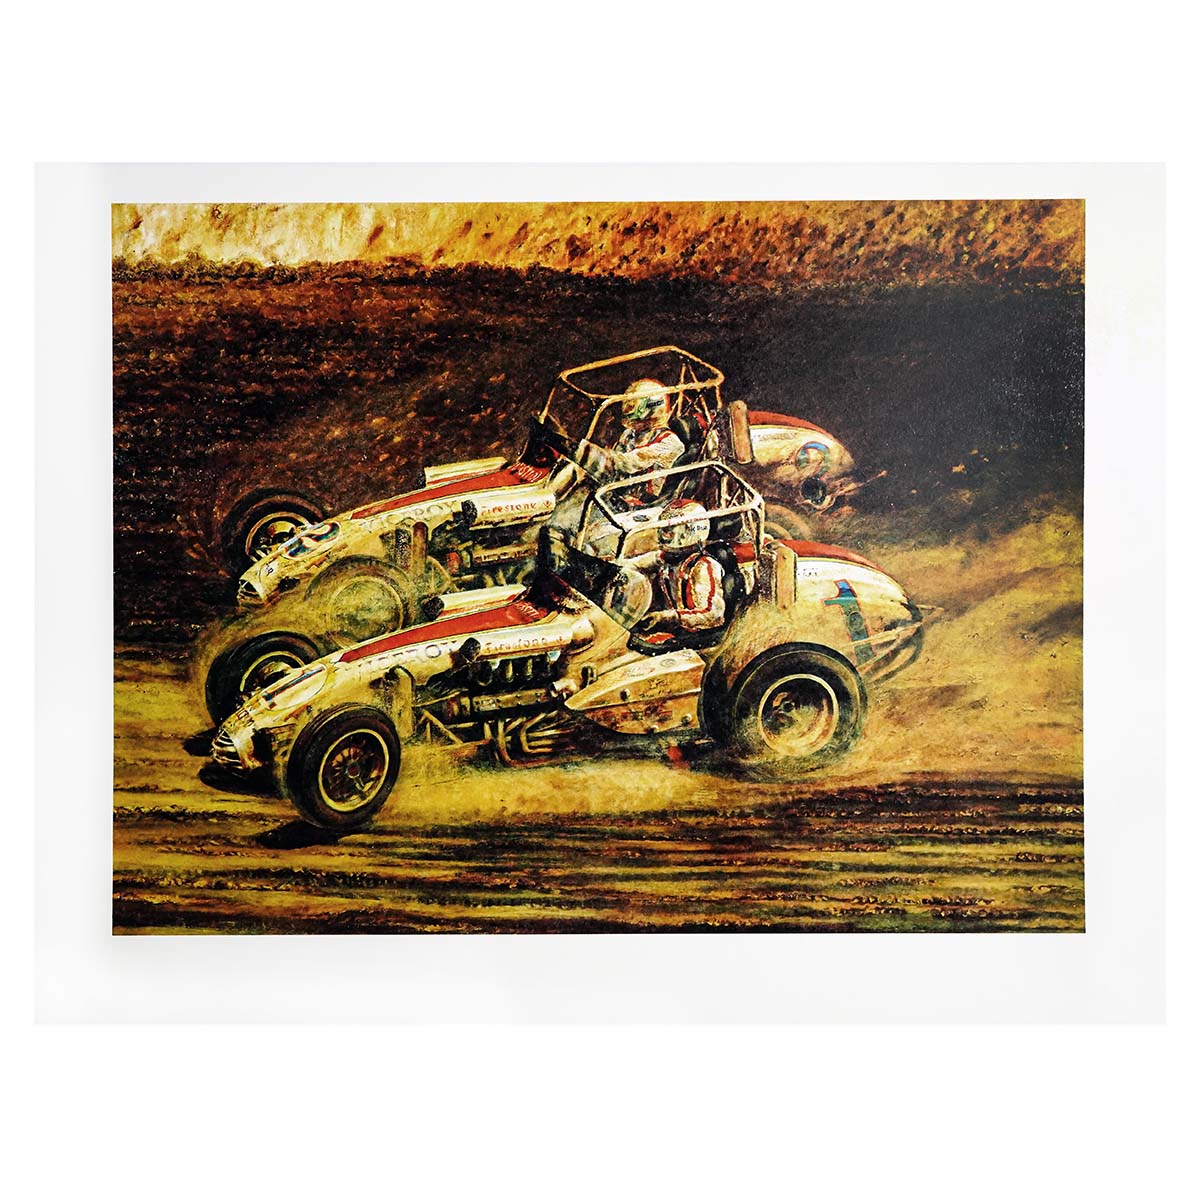 1974 Andretti Unser Duel In The Dirt Ron Burton Limited Edtion Art Print